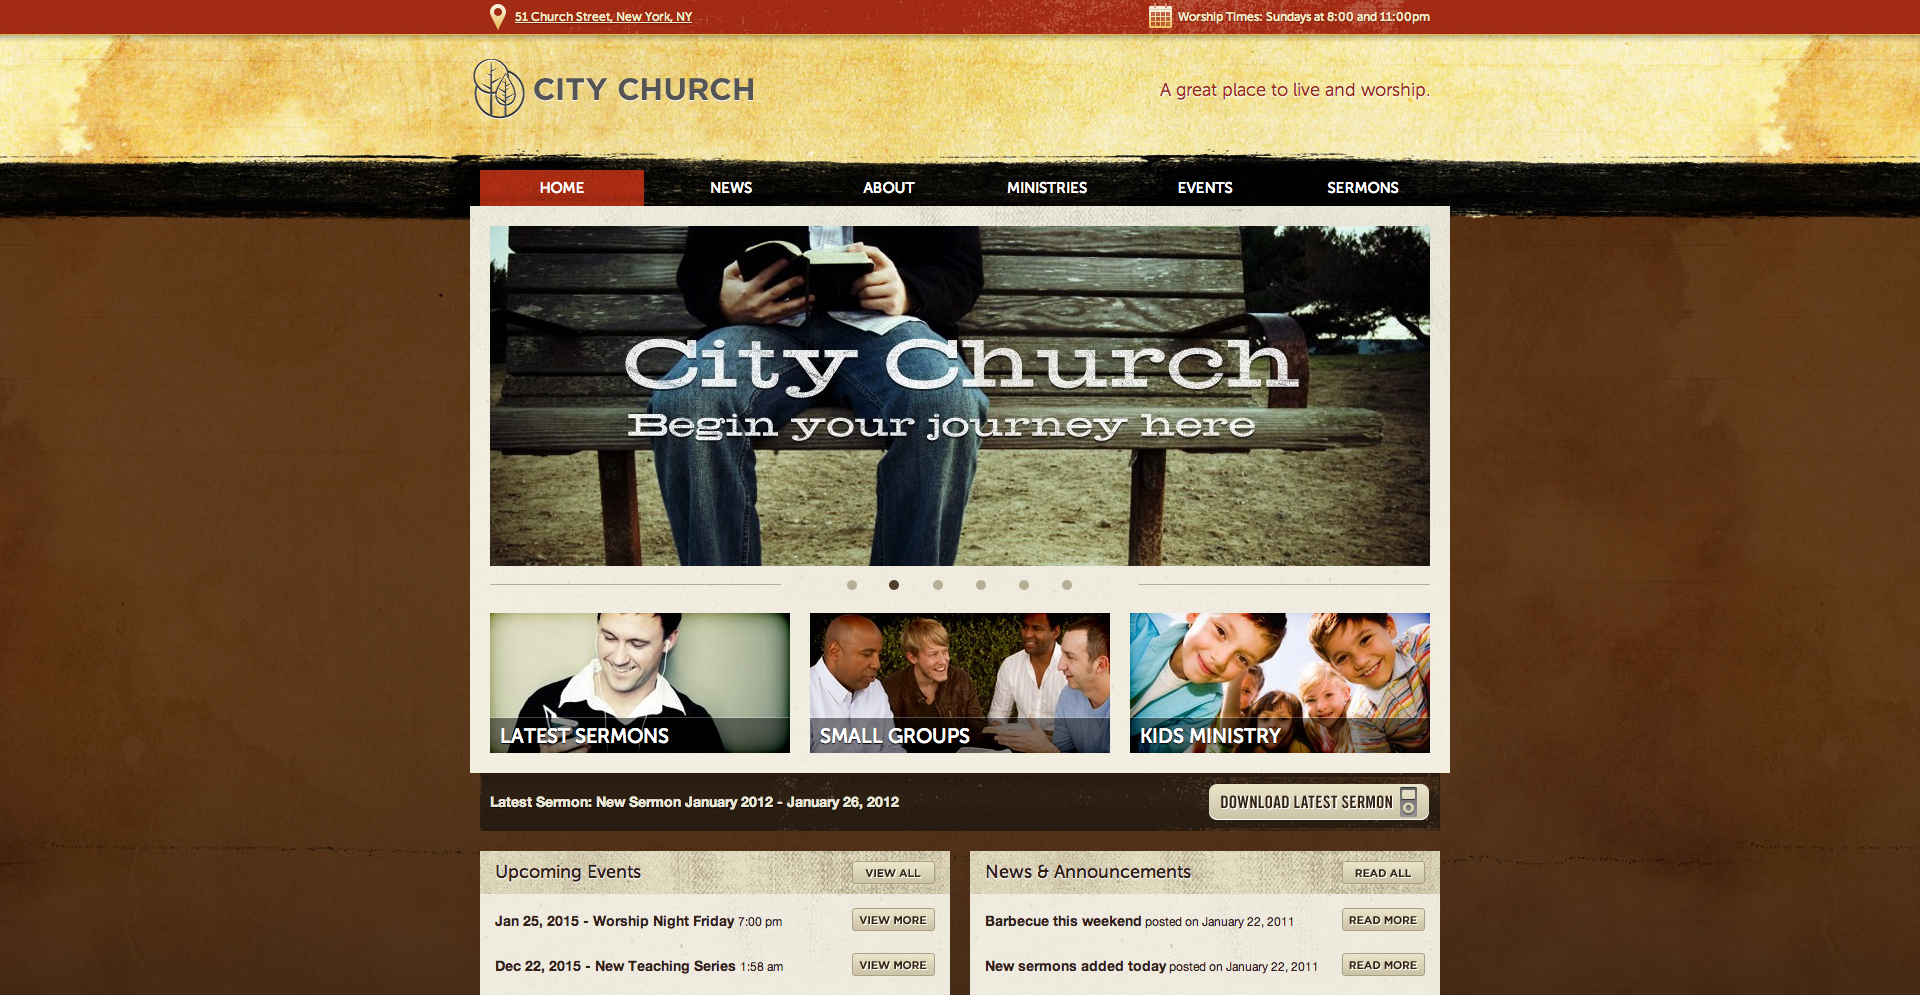 4 More Awesome WordPress Themes for Church